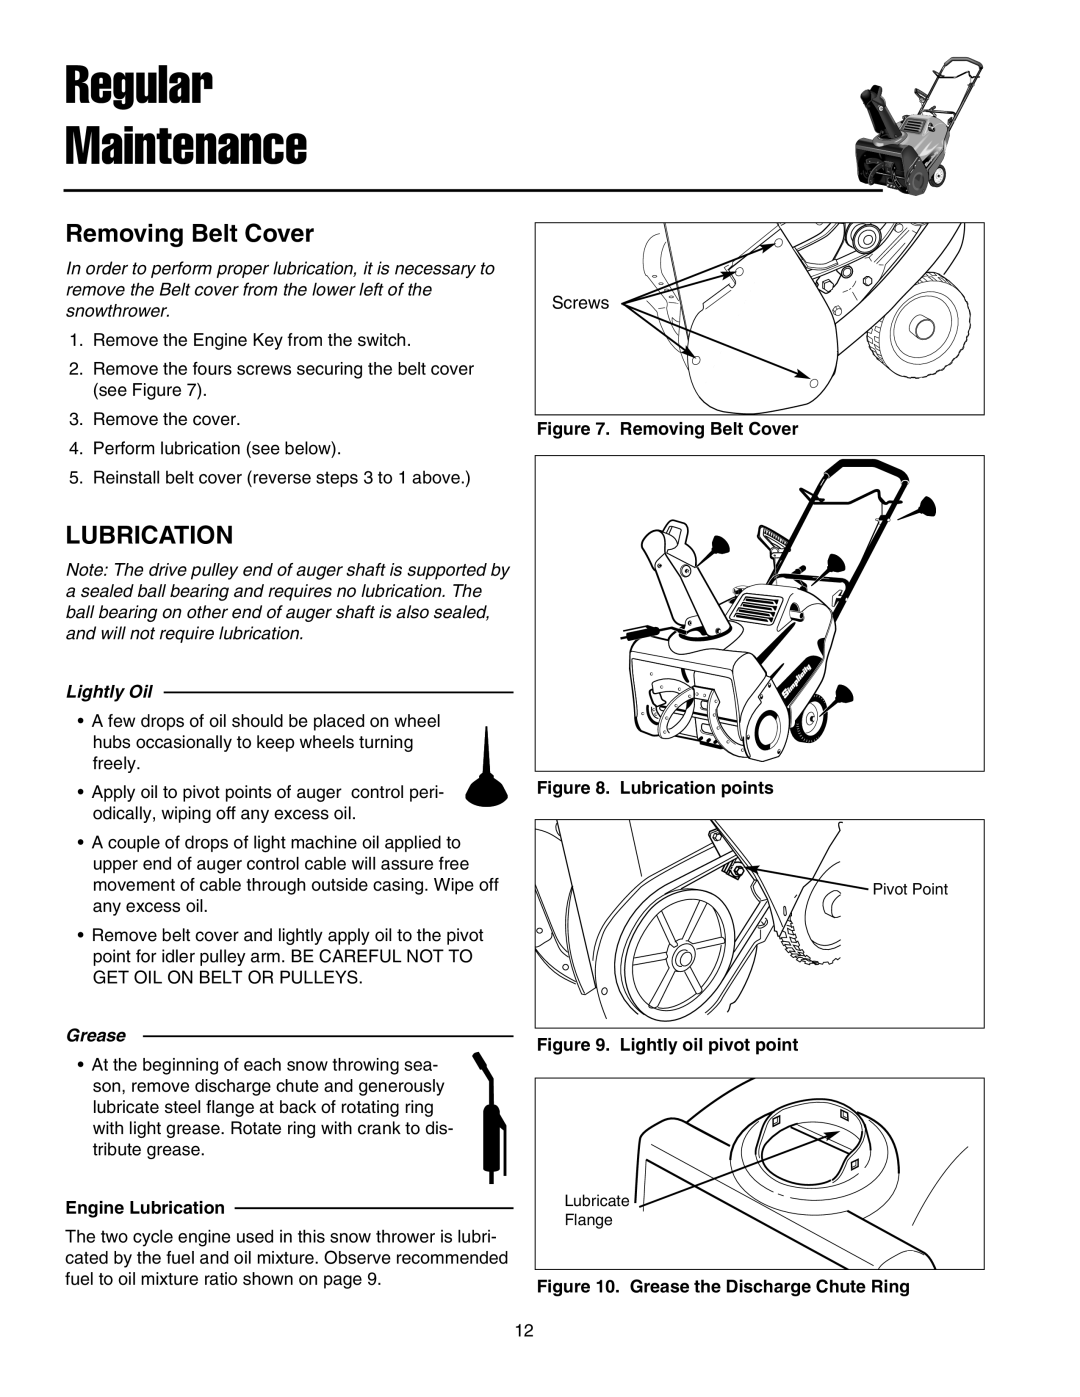 Simplicity 1692992, 1693166 manual Removing Belt Cover, Lubrication points, Engine Lubrication, Lightly oil pivot point 